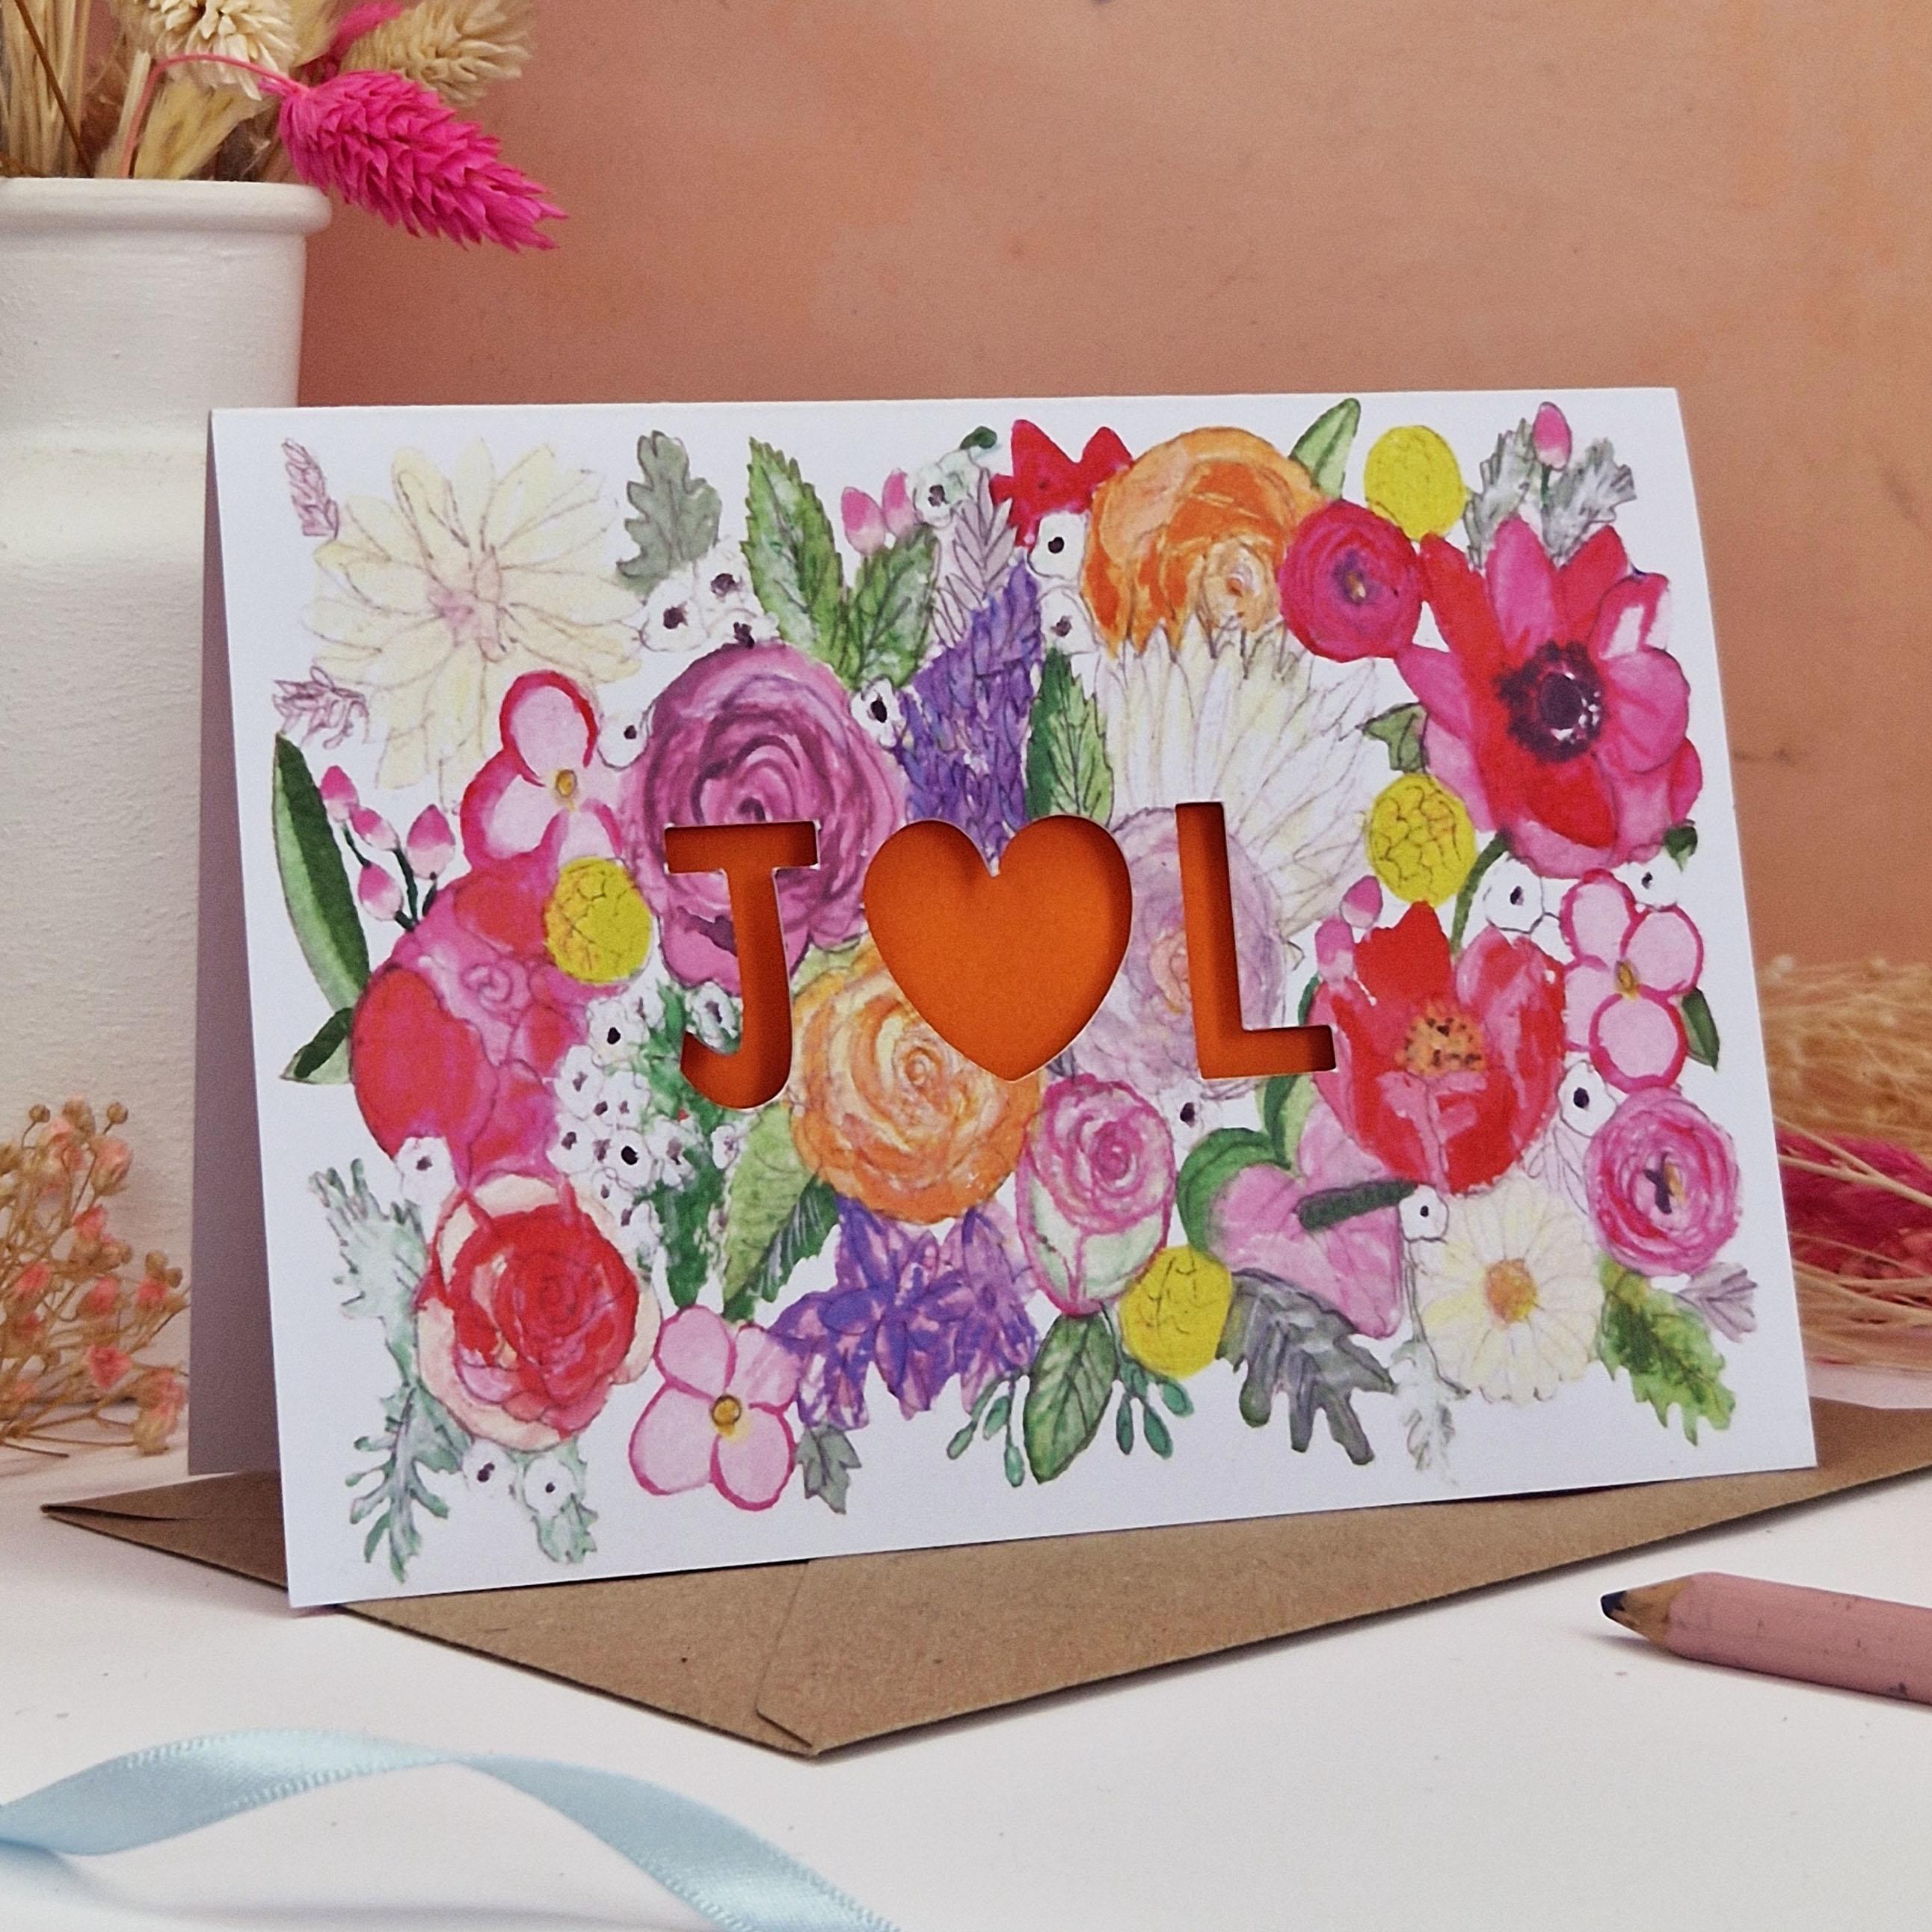 Floral Card with Paper cut text that is personalised with Initials with bright floral background and pink paper liner inside.